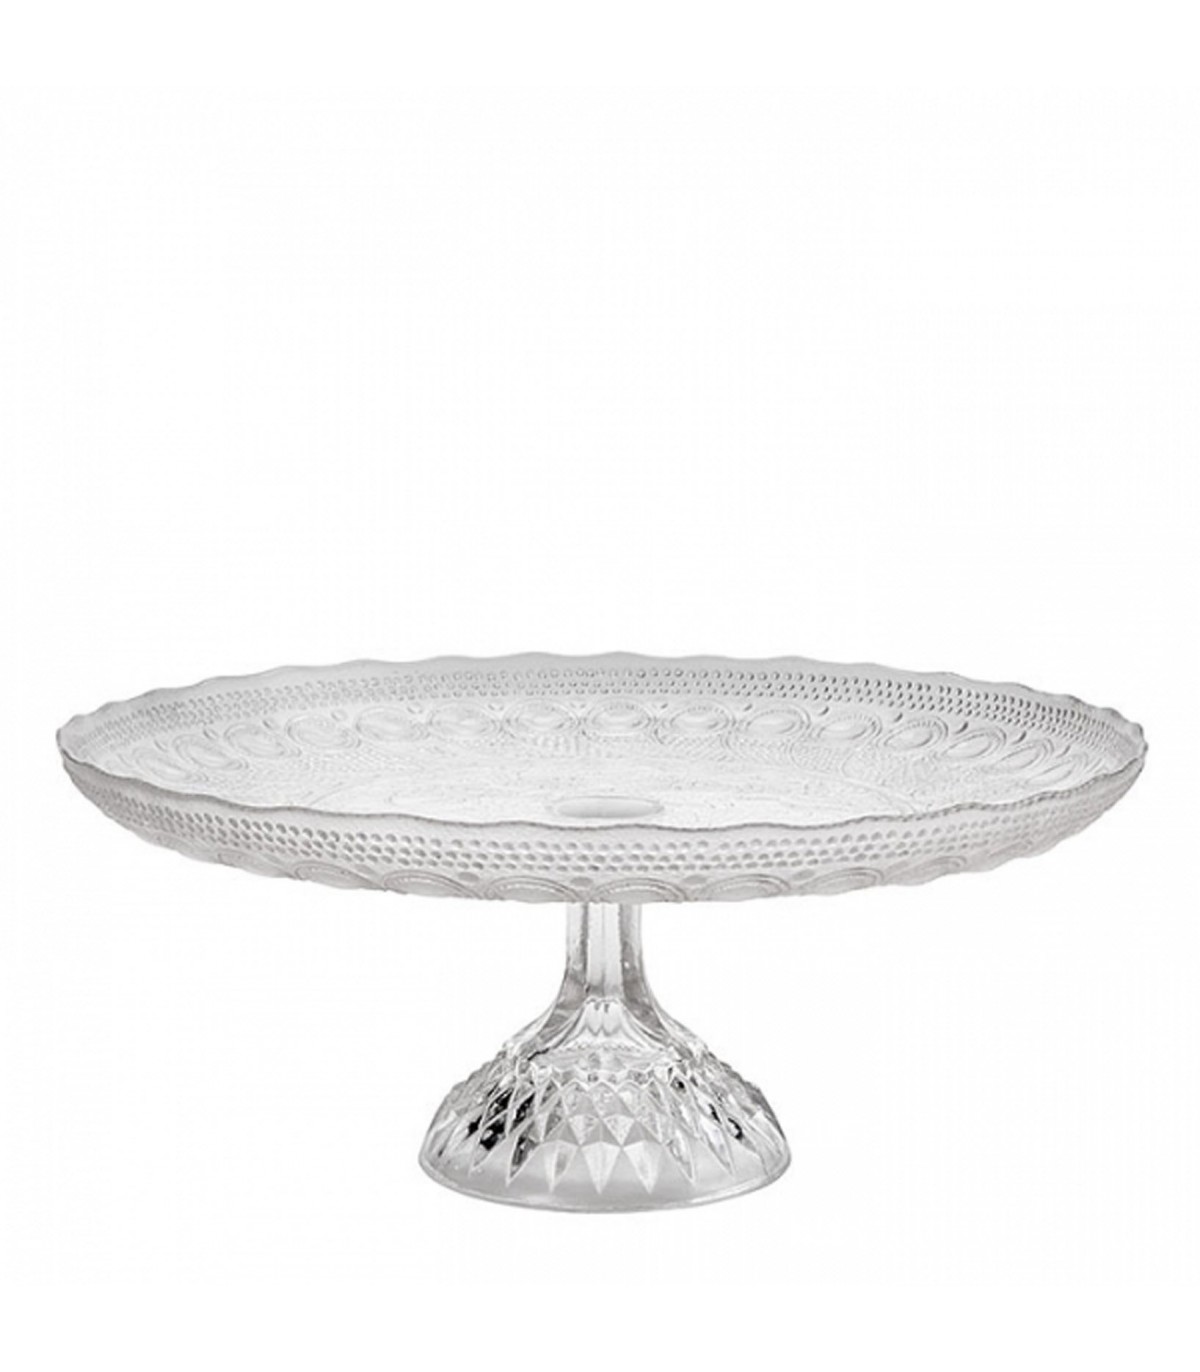 Large cut glass faceted cake plate